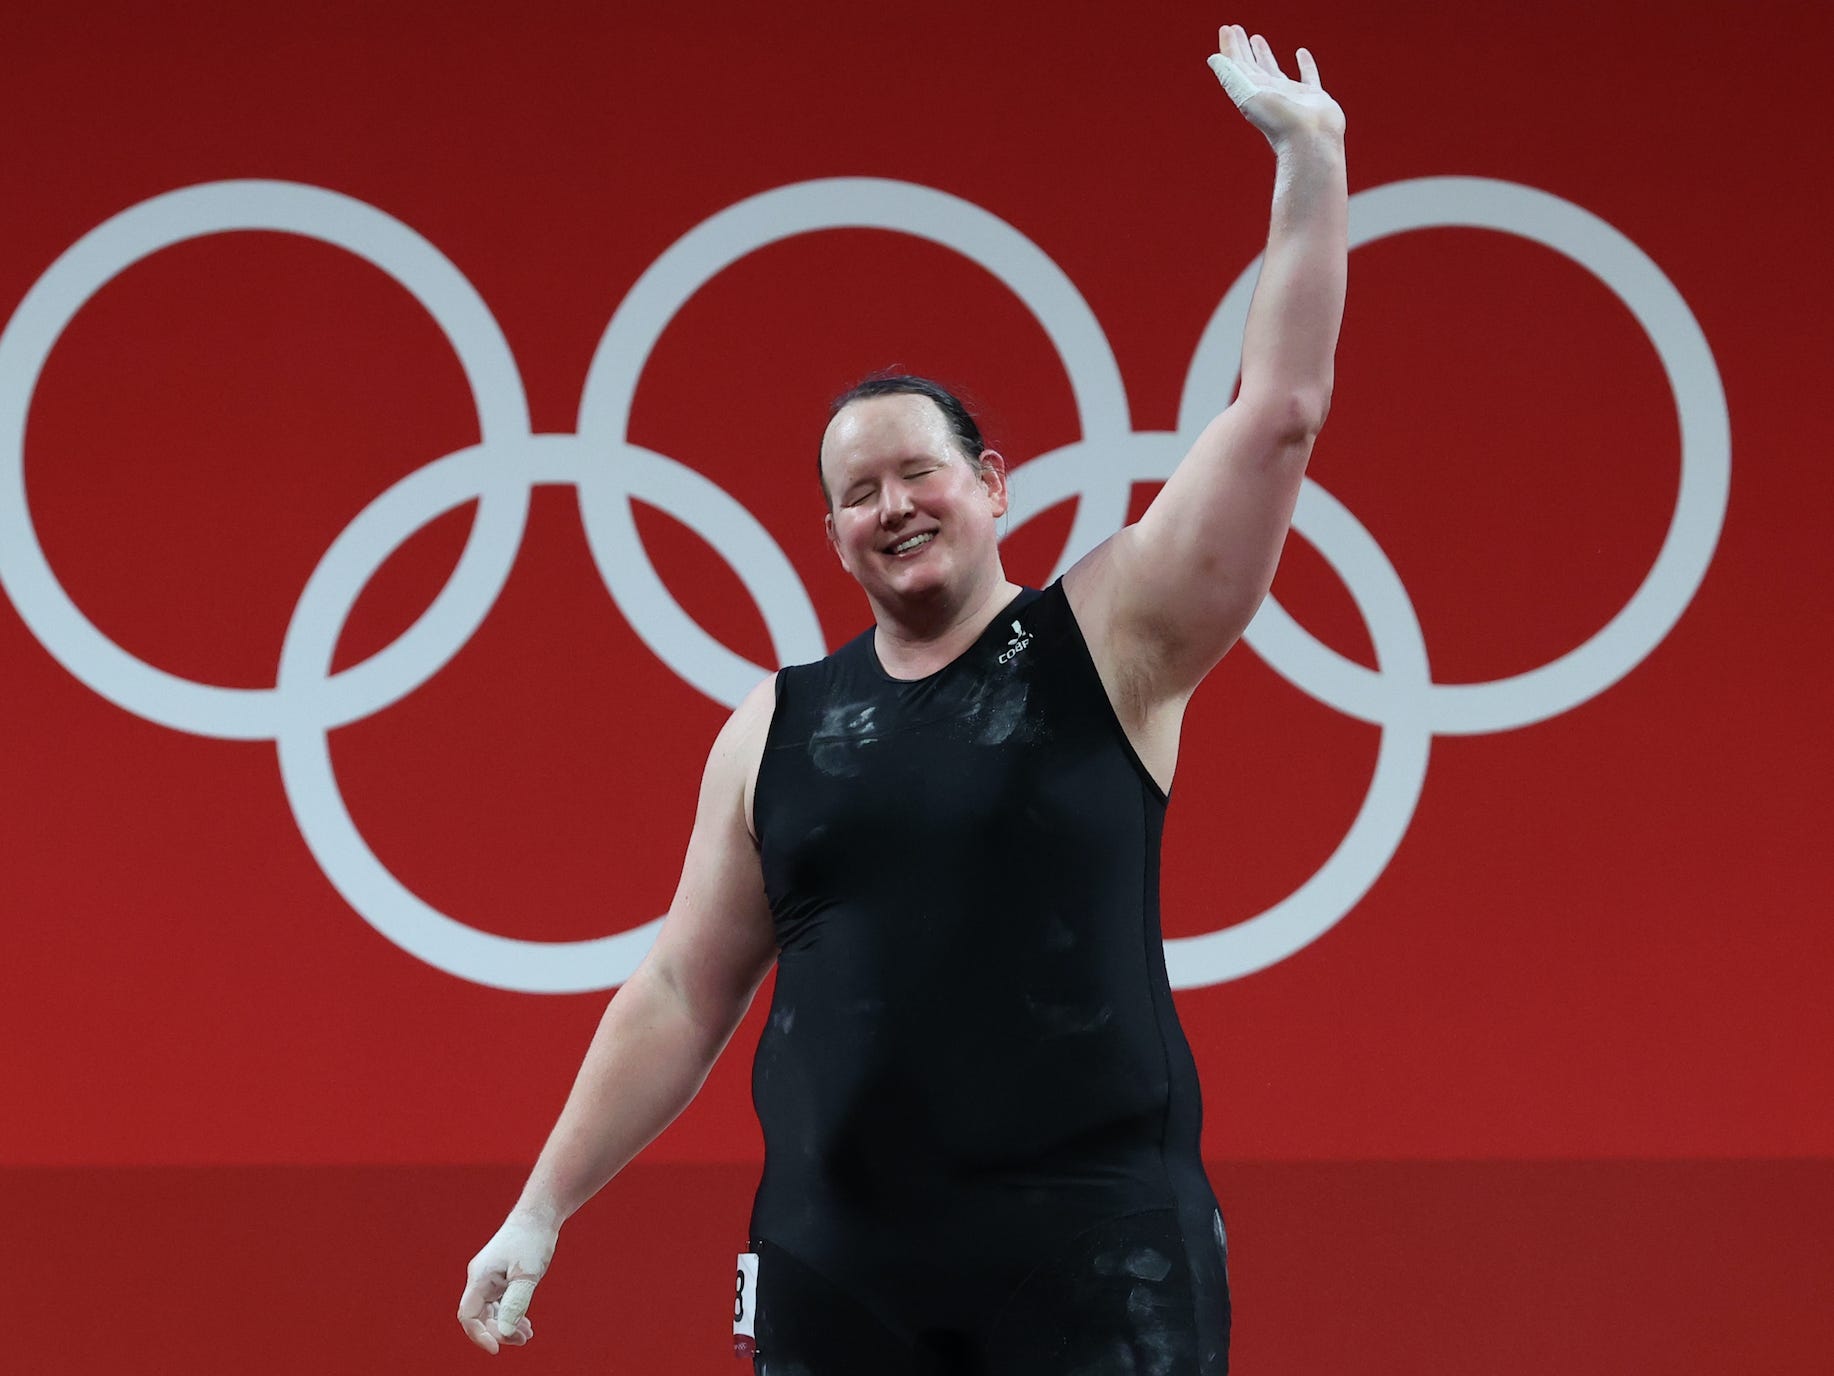 Laurel Hubbard, of New Zealand, waves during the weightlifting event at the Olympic Games in Tokyo.